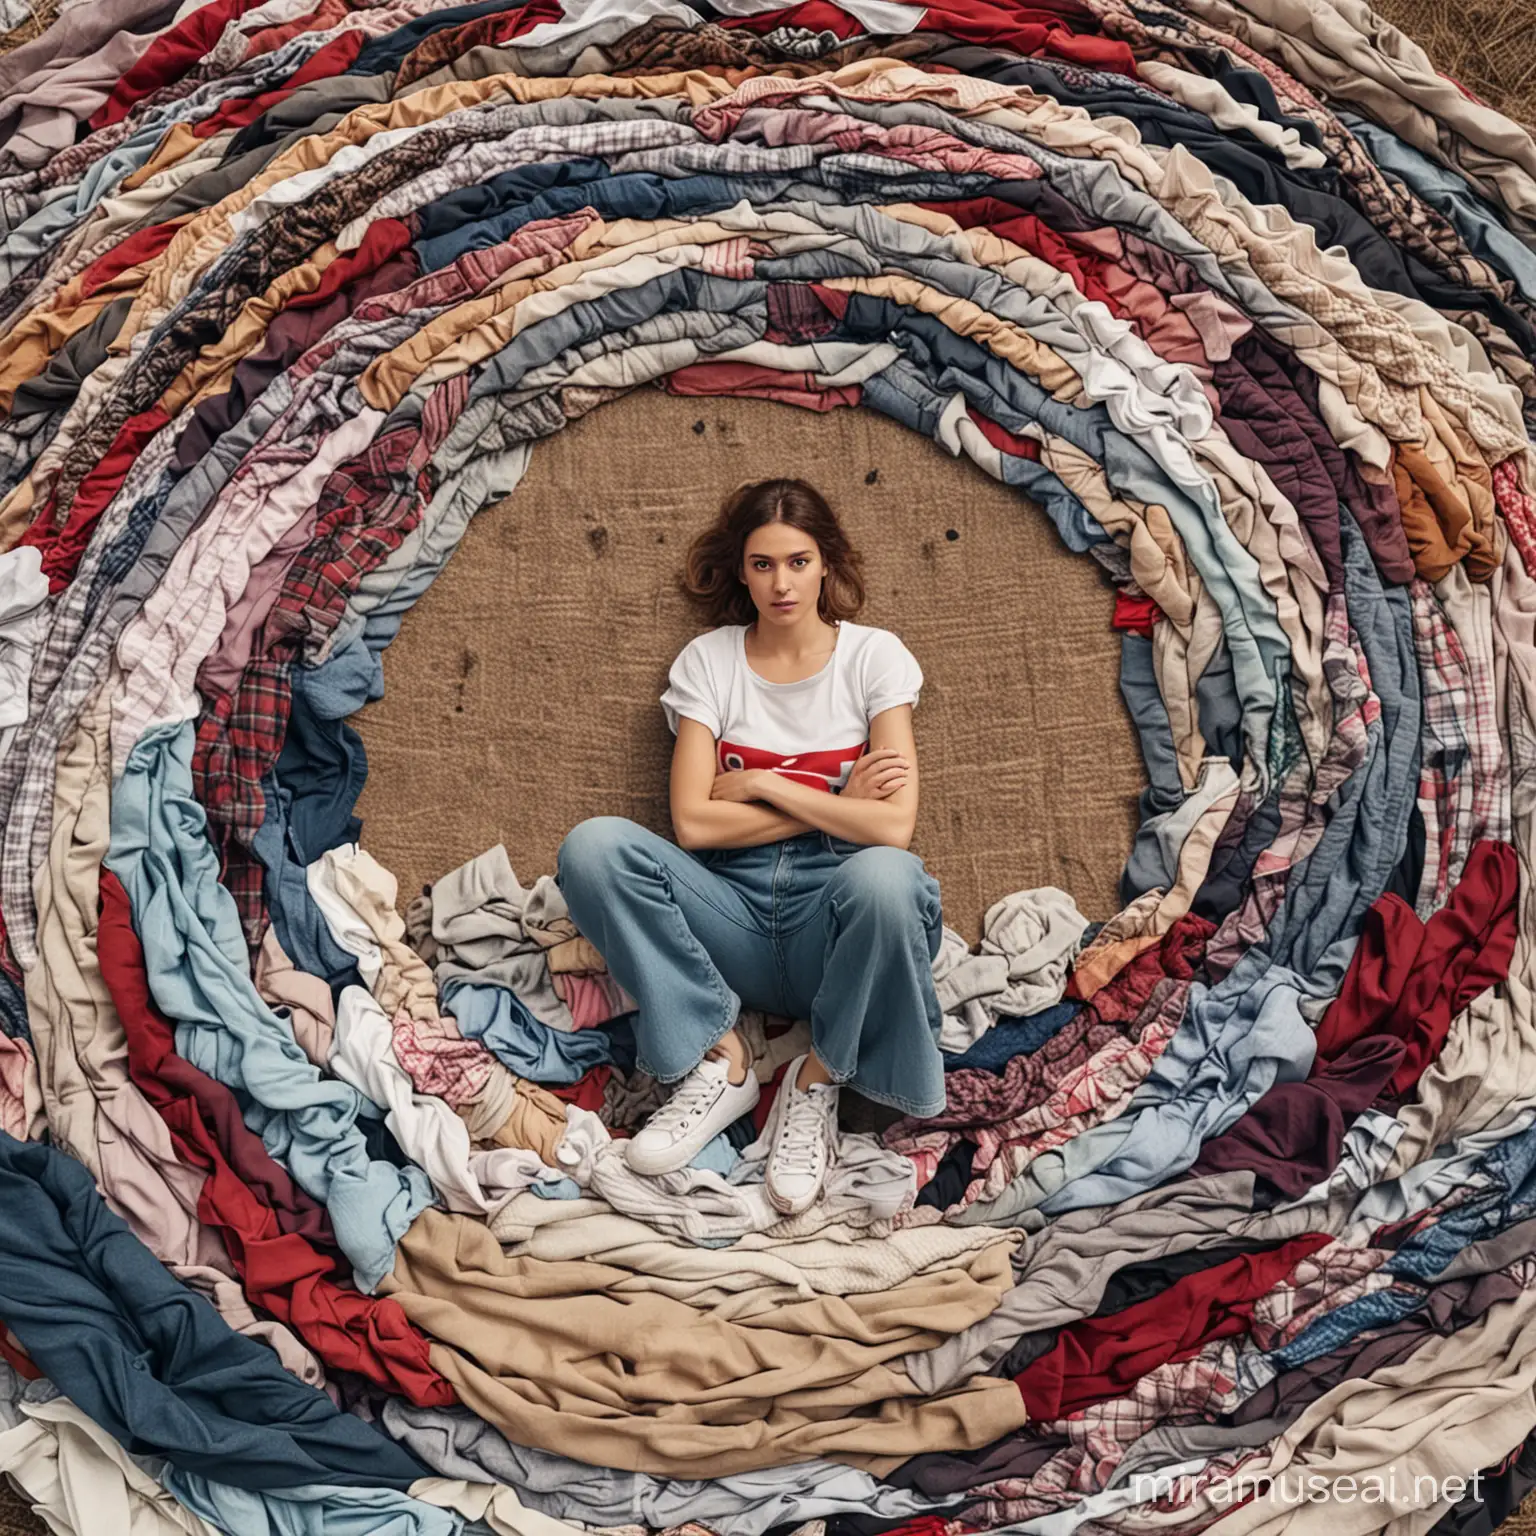 Woman Sitting on Pile of Clothes with Recycling Symbol